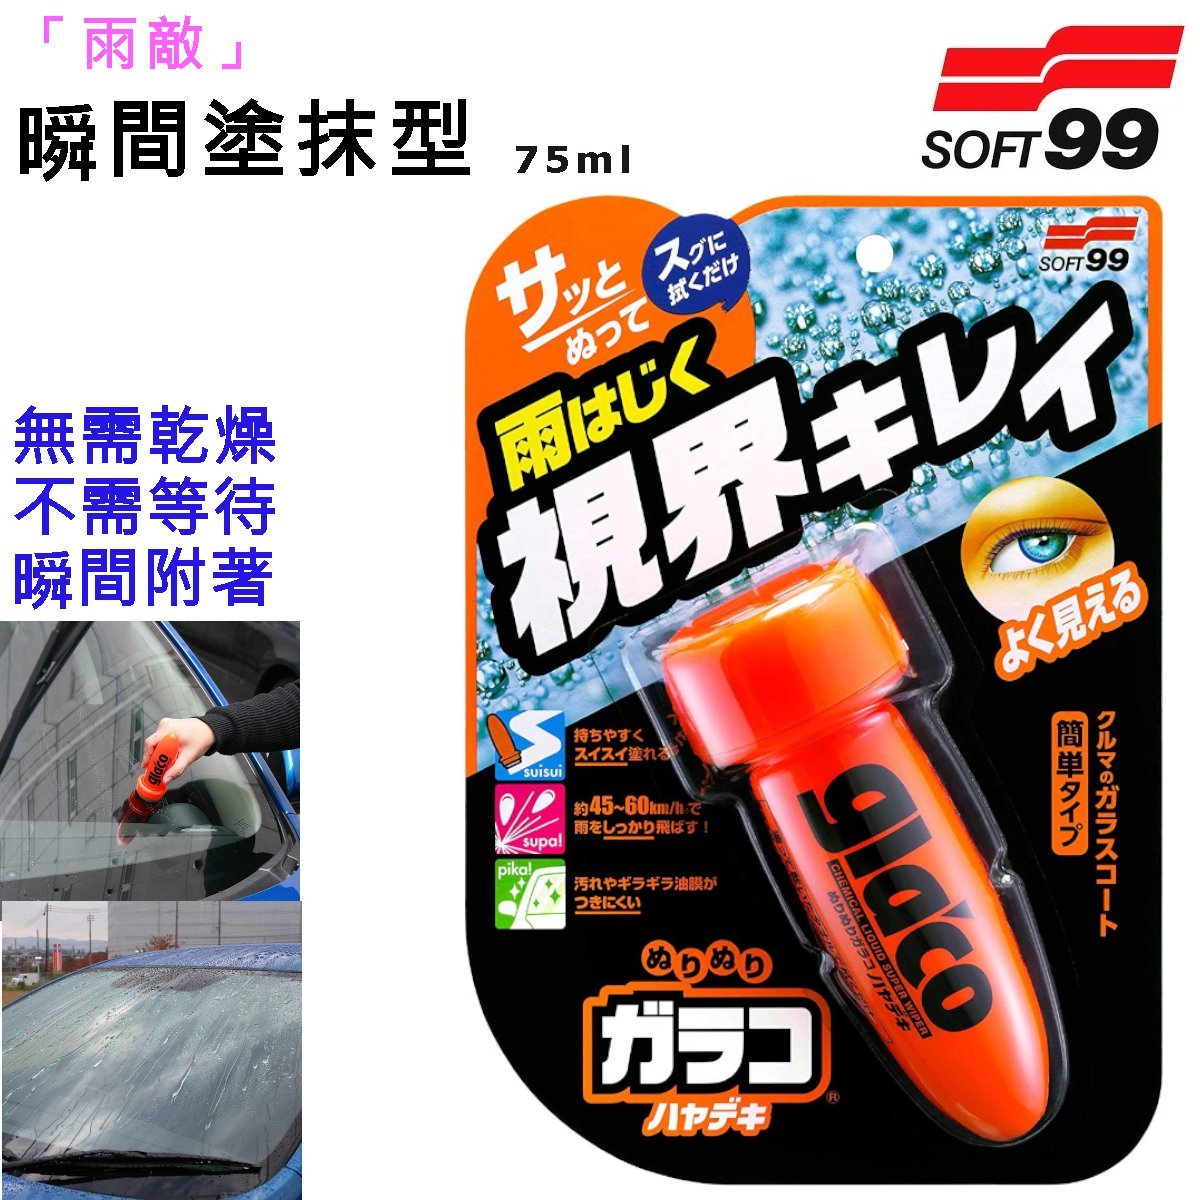 SOFT99 Glaco Roll On Instant Dry 【SOFT99 TV】 